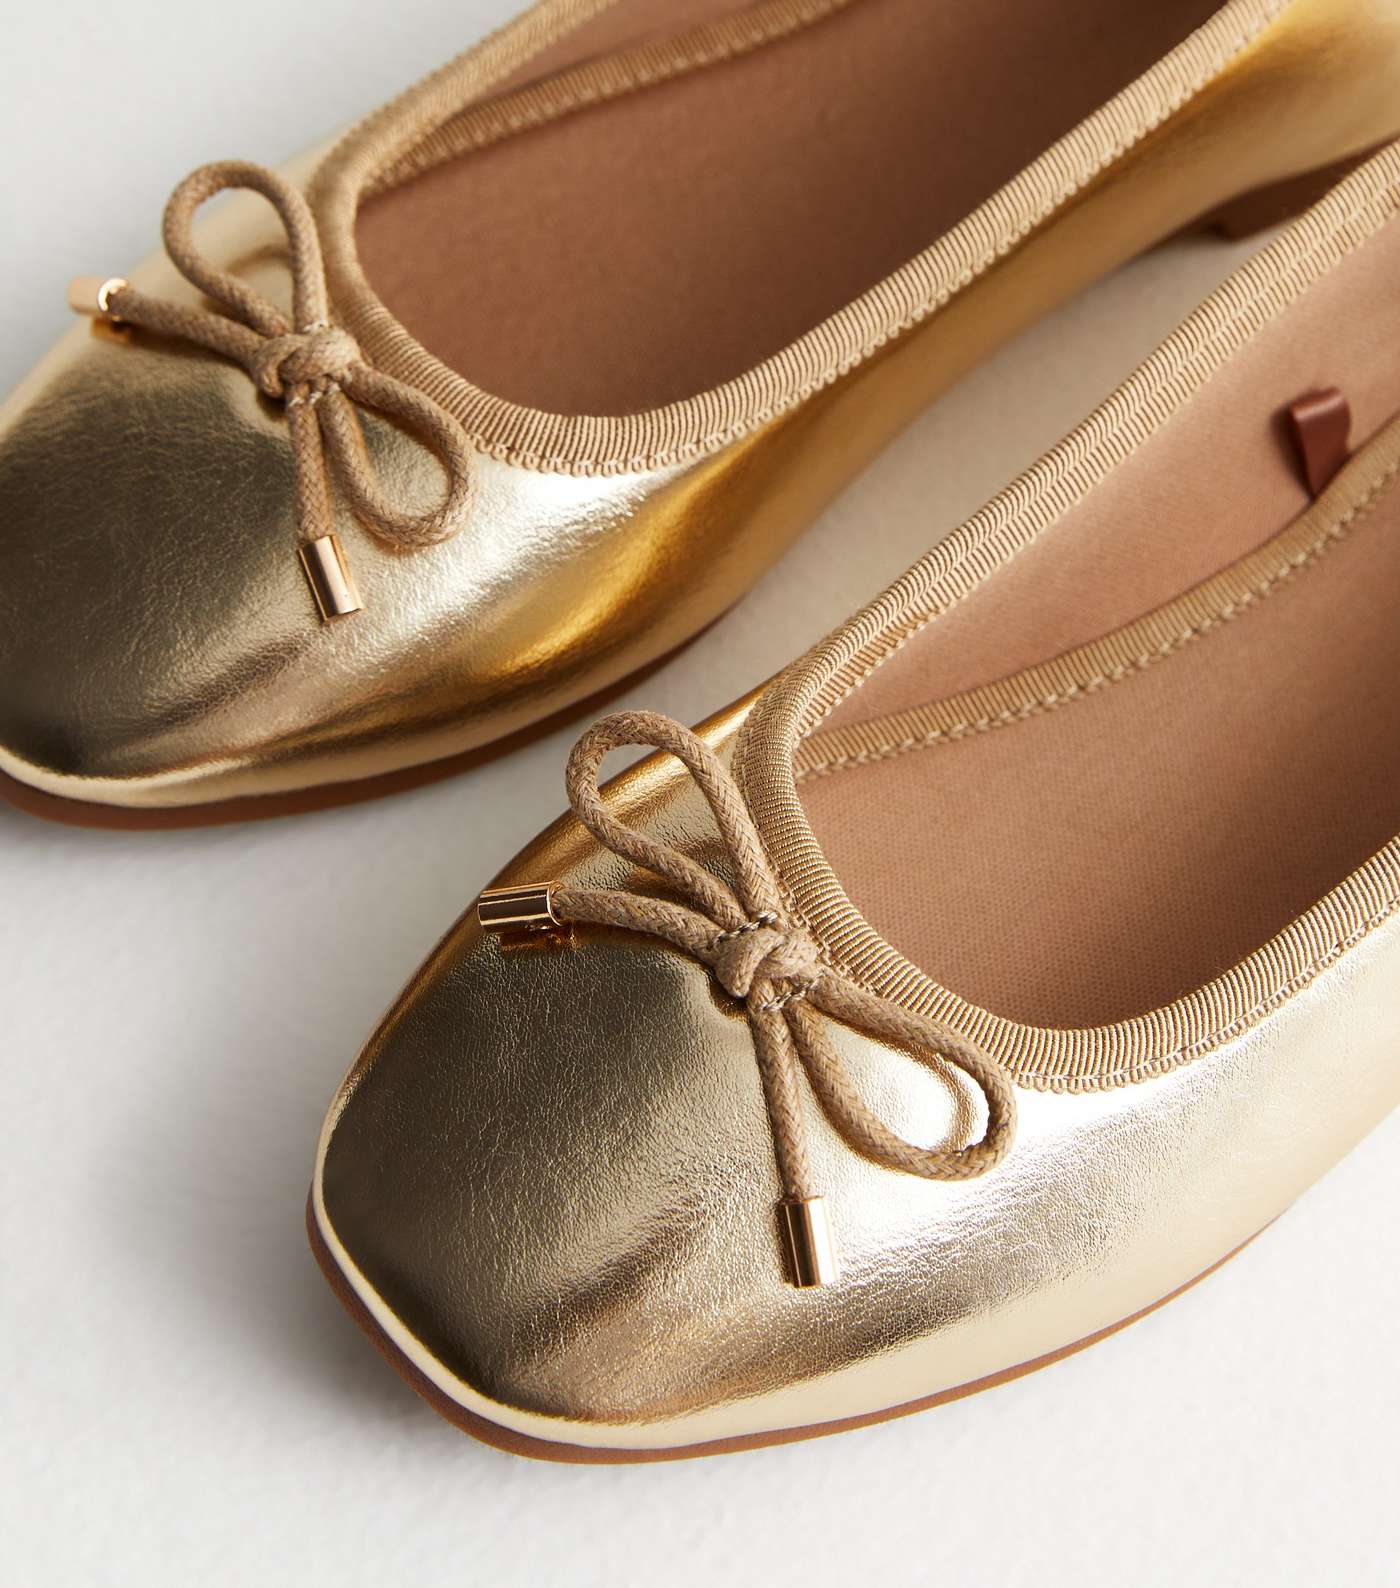 Gold Leather-Look Bow Ballet Pumps Image 3